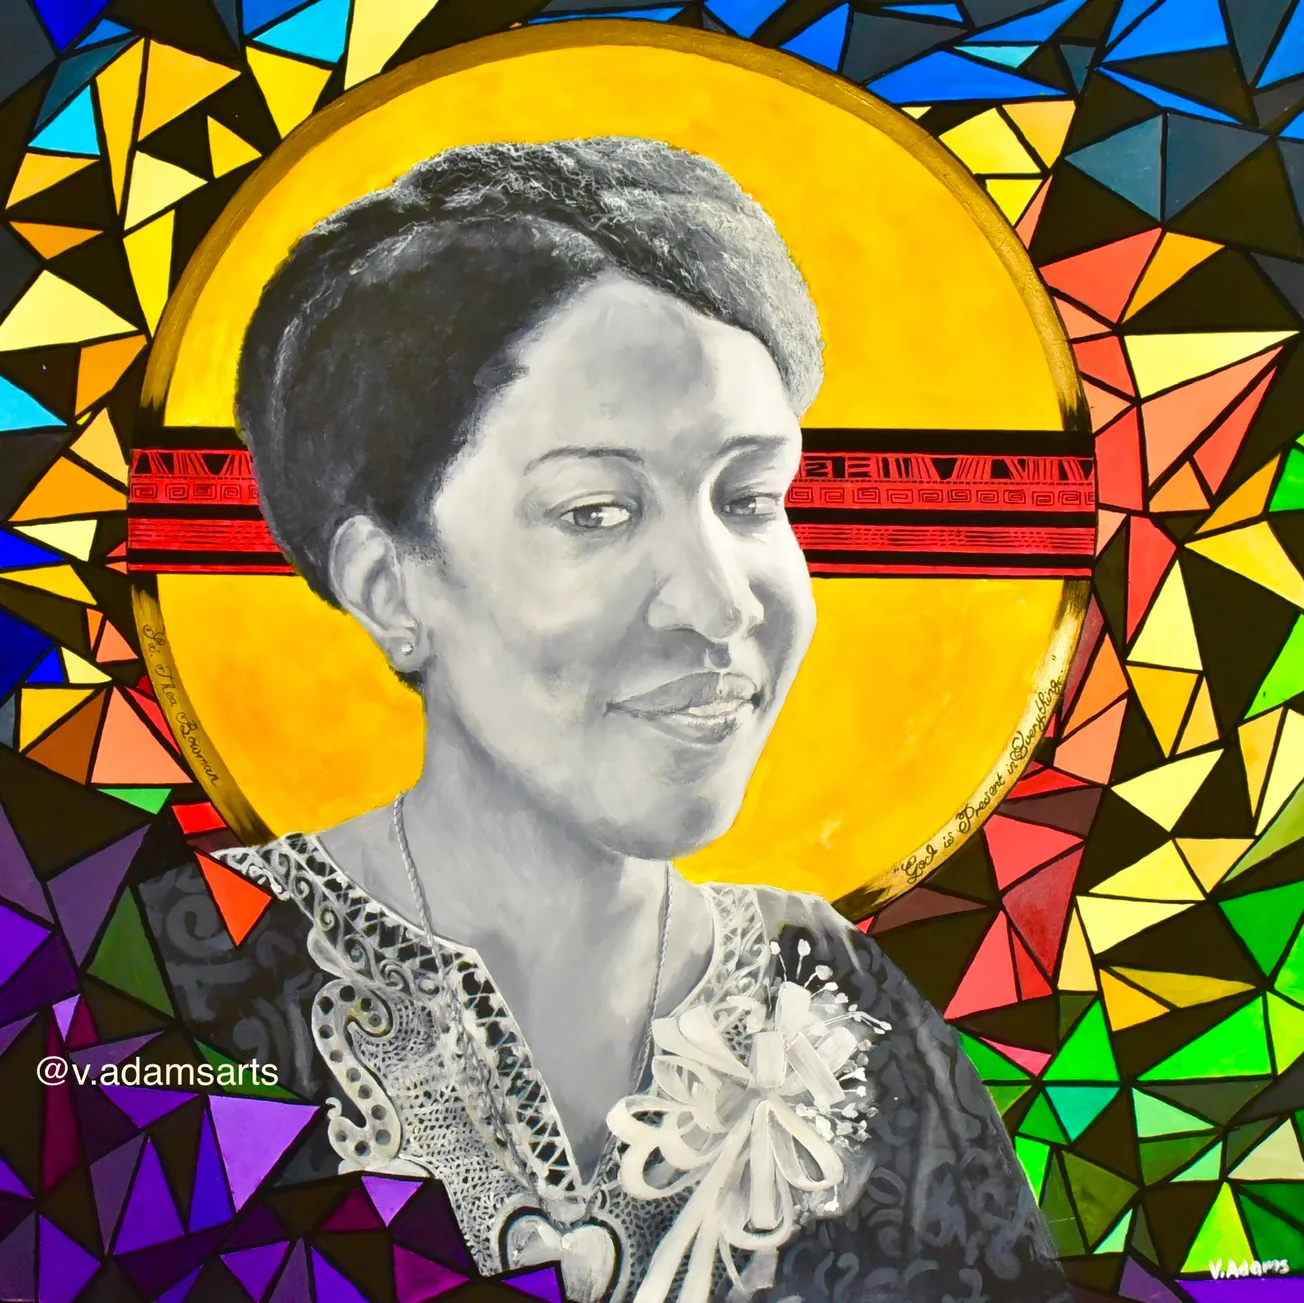 New Thea Bowman portrait created by painter Vernon Adams